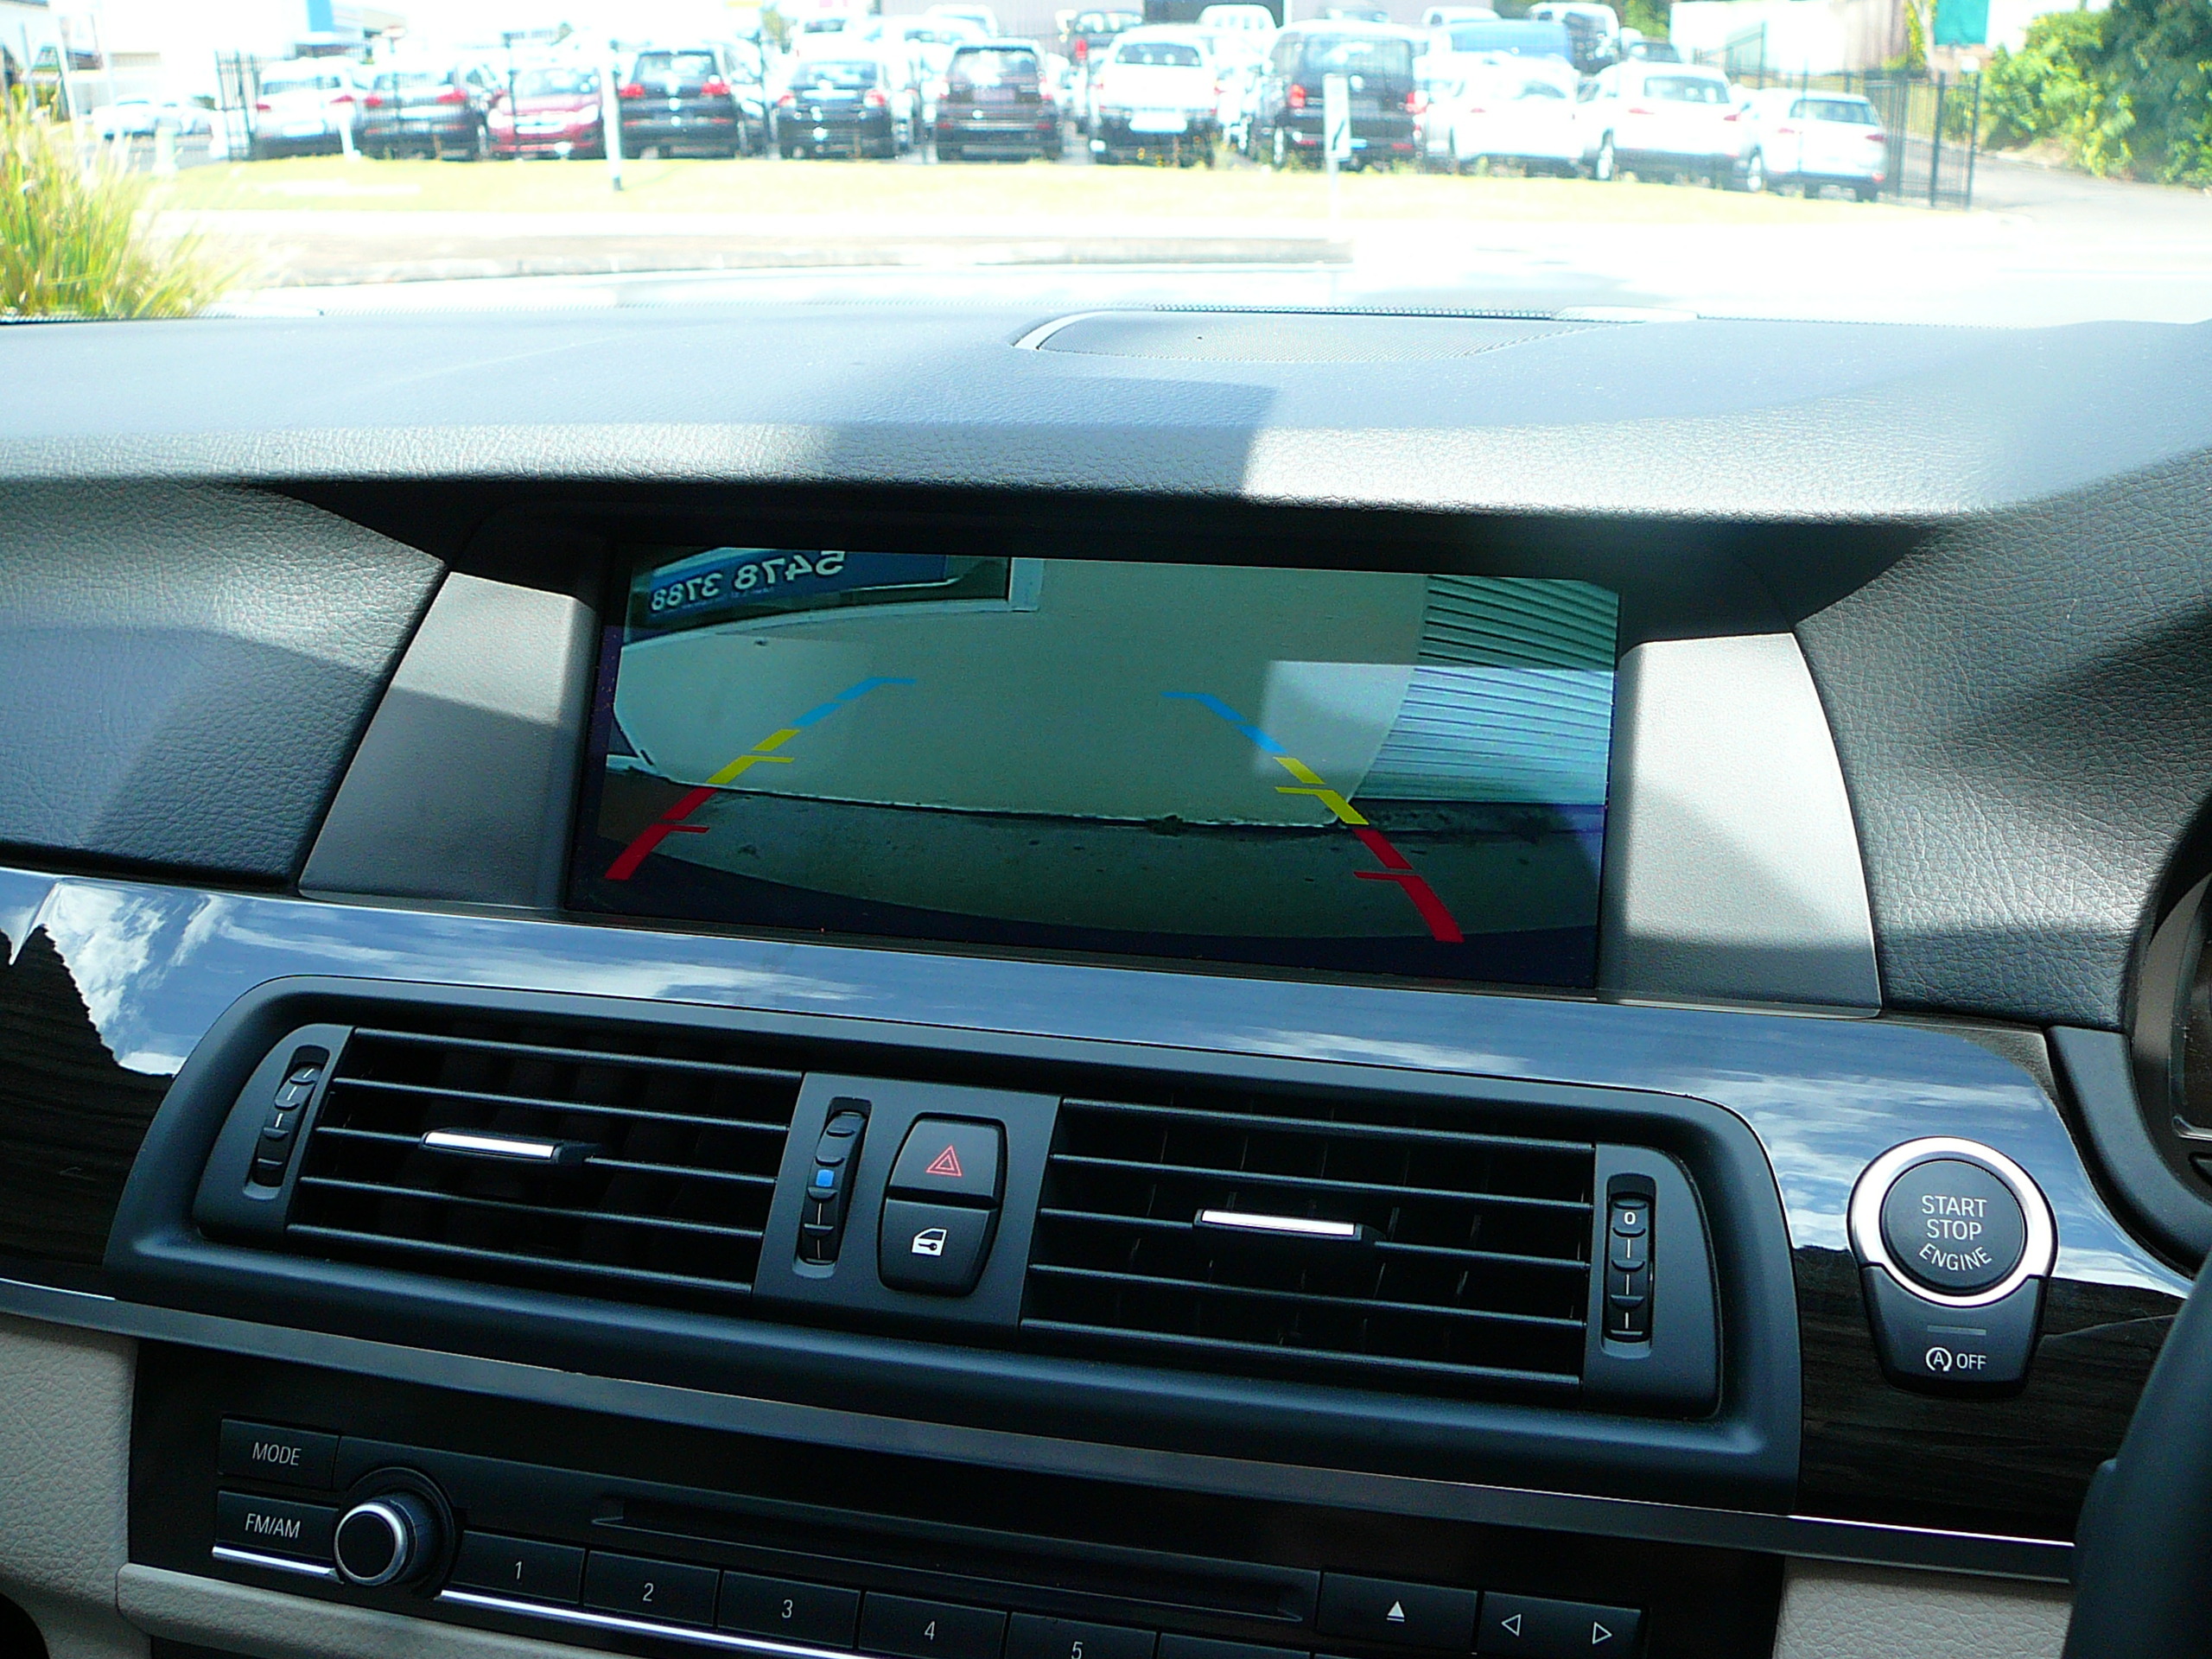 BMW 528i 2013, Aftermarket Reverse Camera added to factory BMW screen